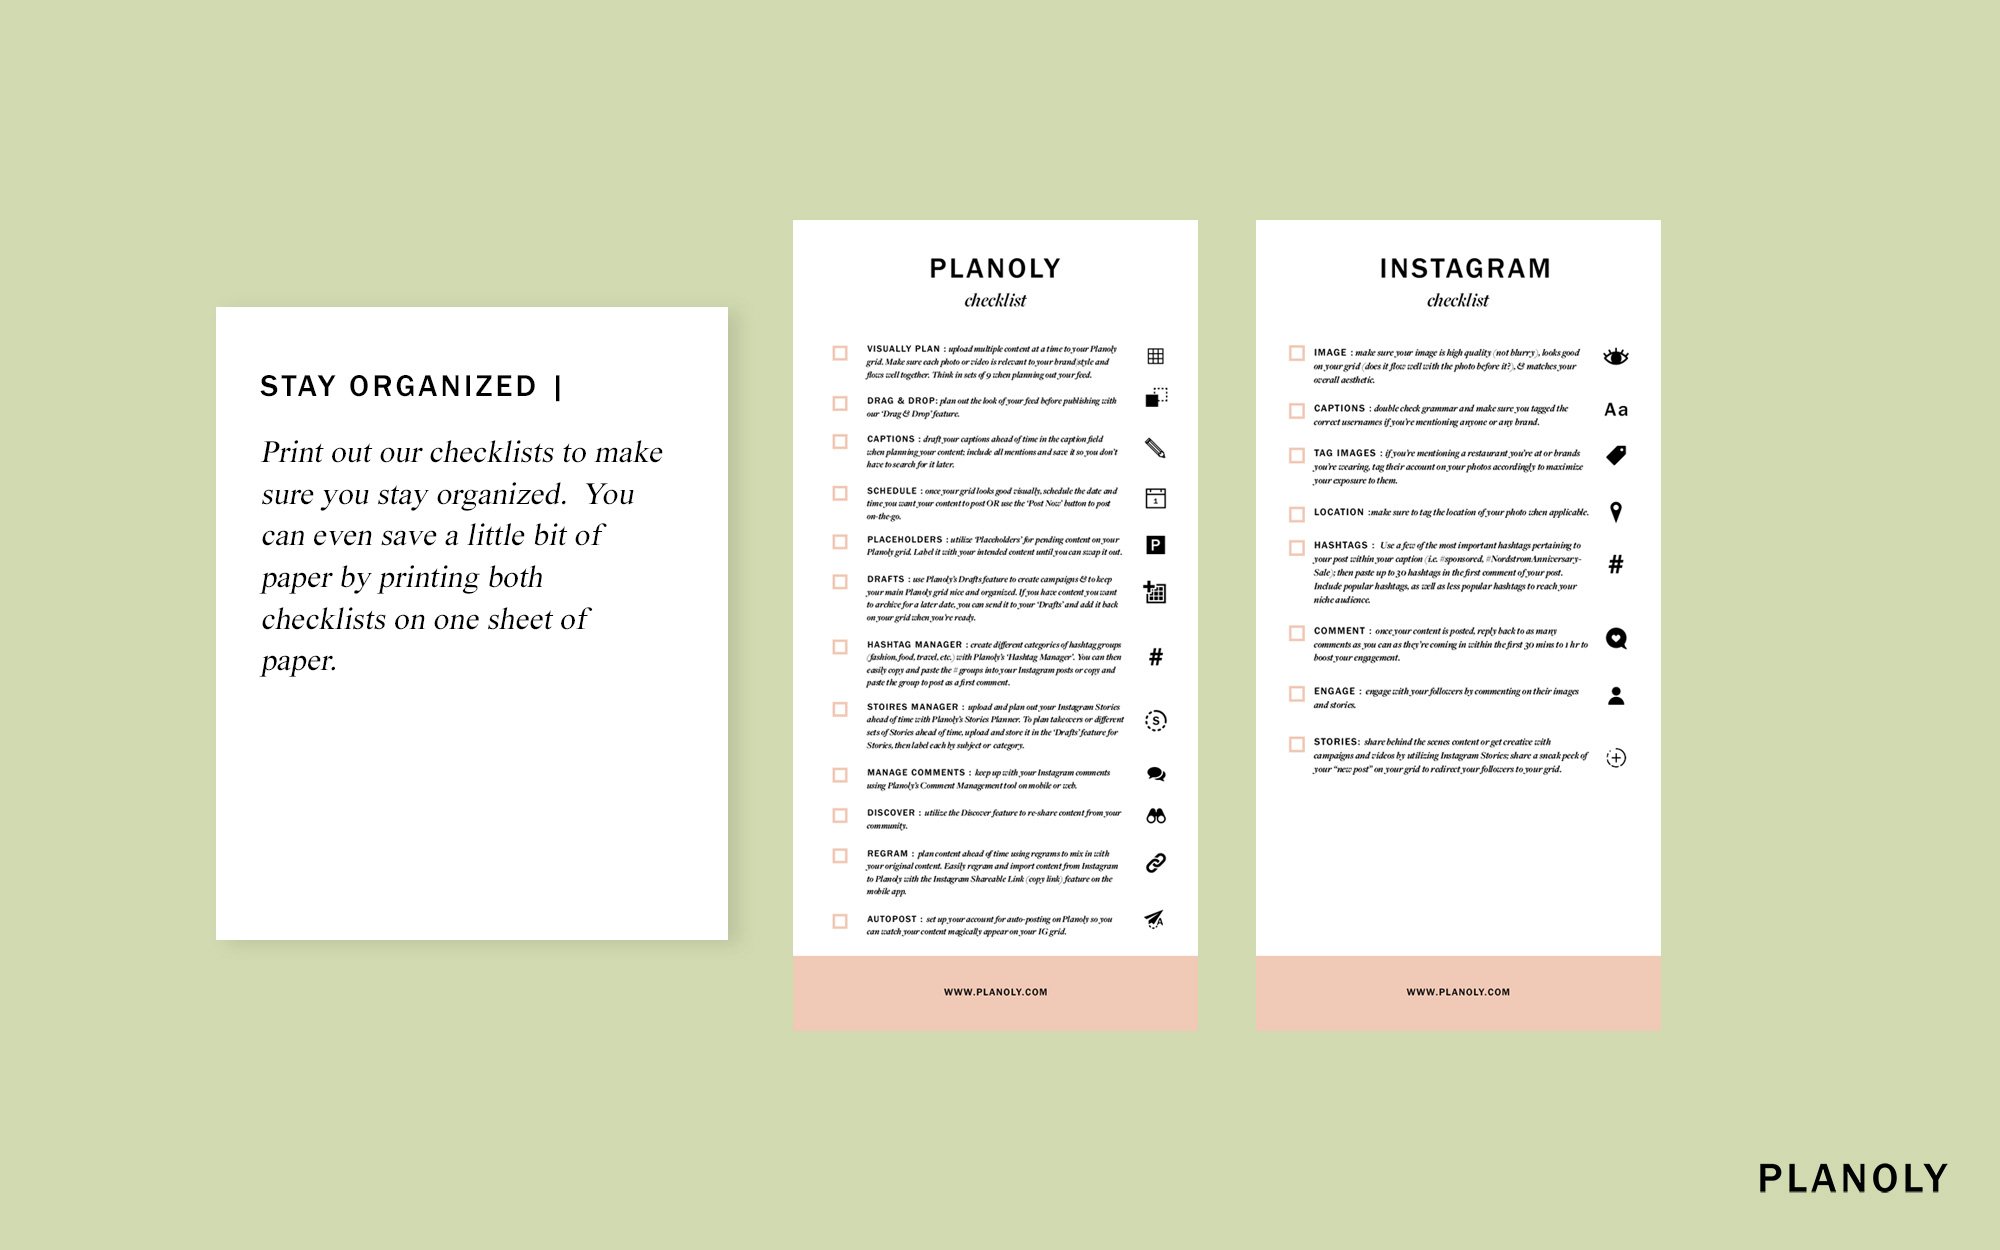 Downloadable Instagram and PLANOLY Checklist